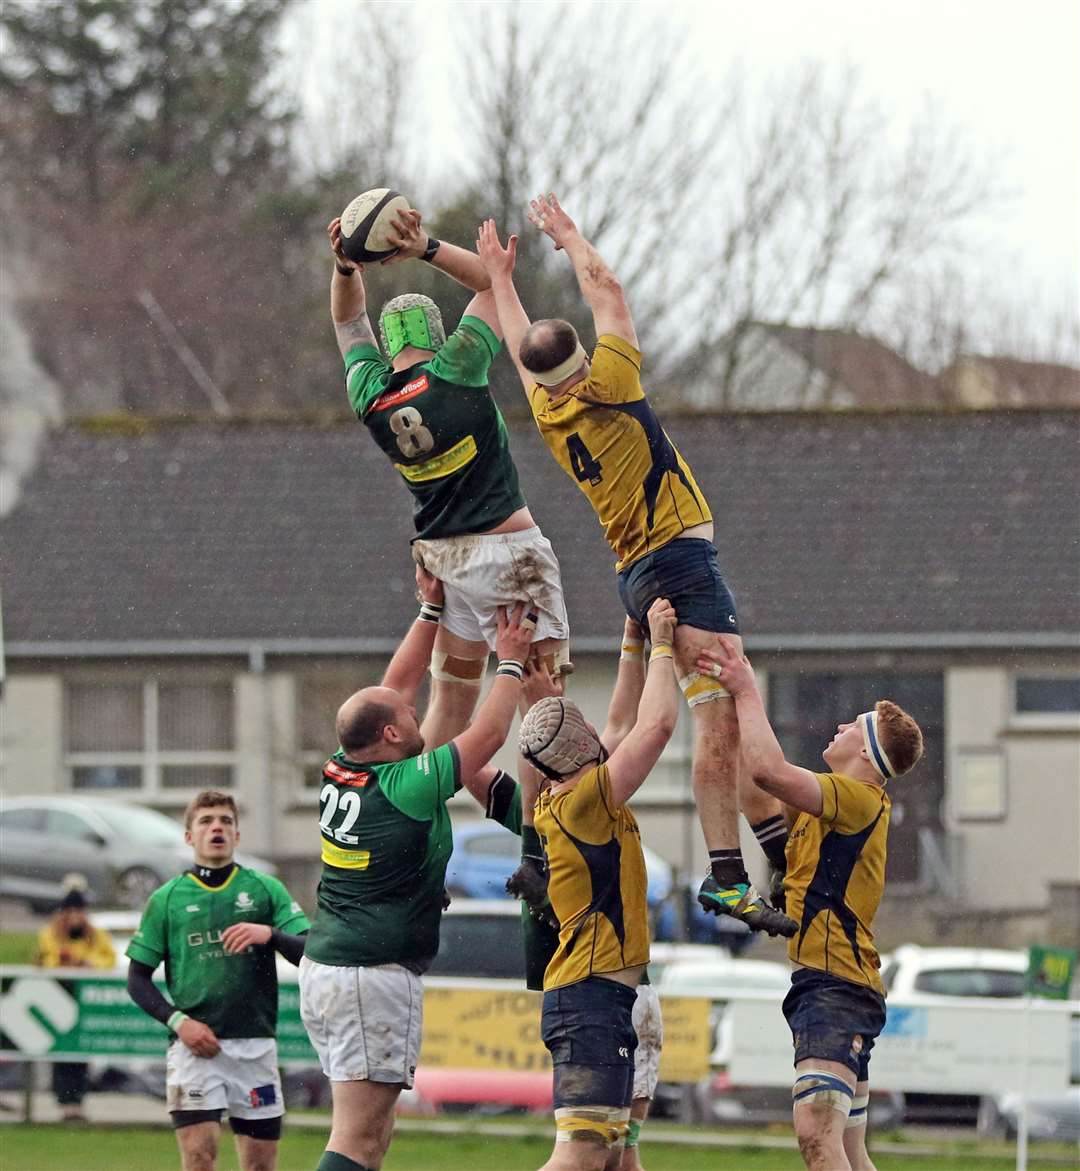 Grant Anderson wins a line-out for the Greens in the recent clash with Gordonians at Millbank. Picture: James Gunn